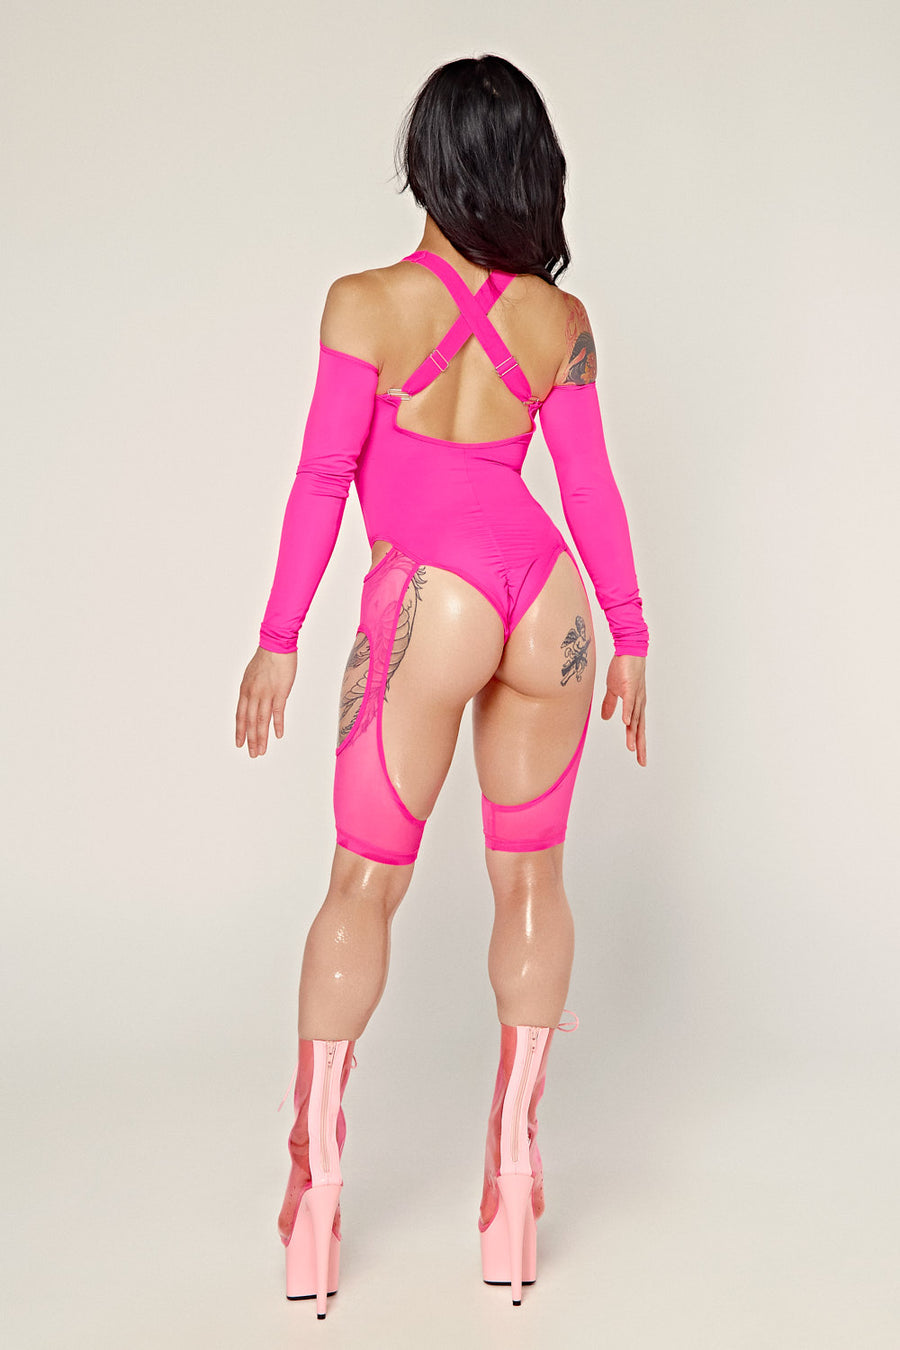 The Fabulous Stains - Club Exx Bad Barbie Bodysuit - c'mon Barbie let's go  party! This light pink bodysuit has cut-outs at the neck N' sides and a  sheer top so you